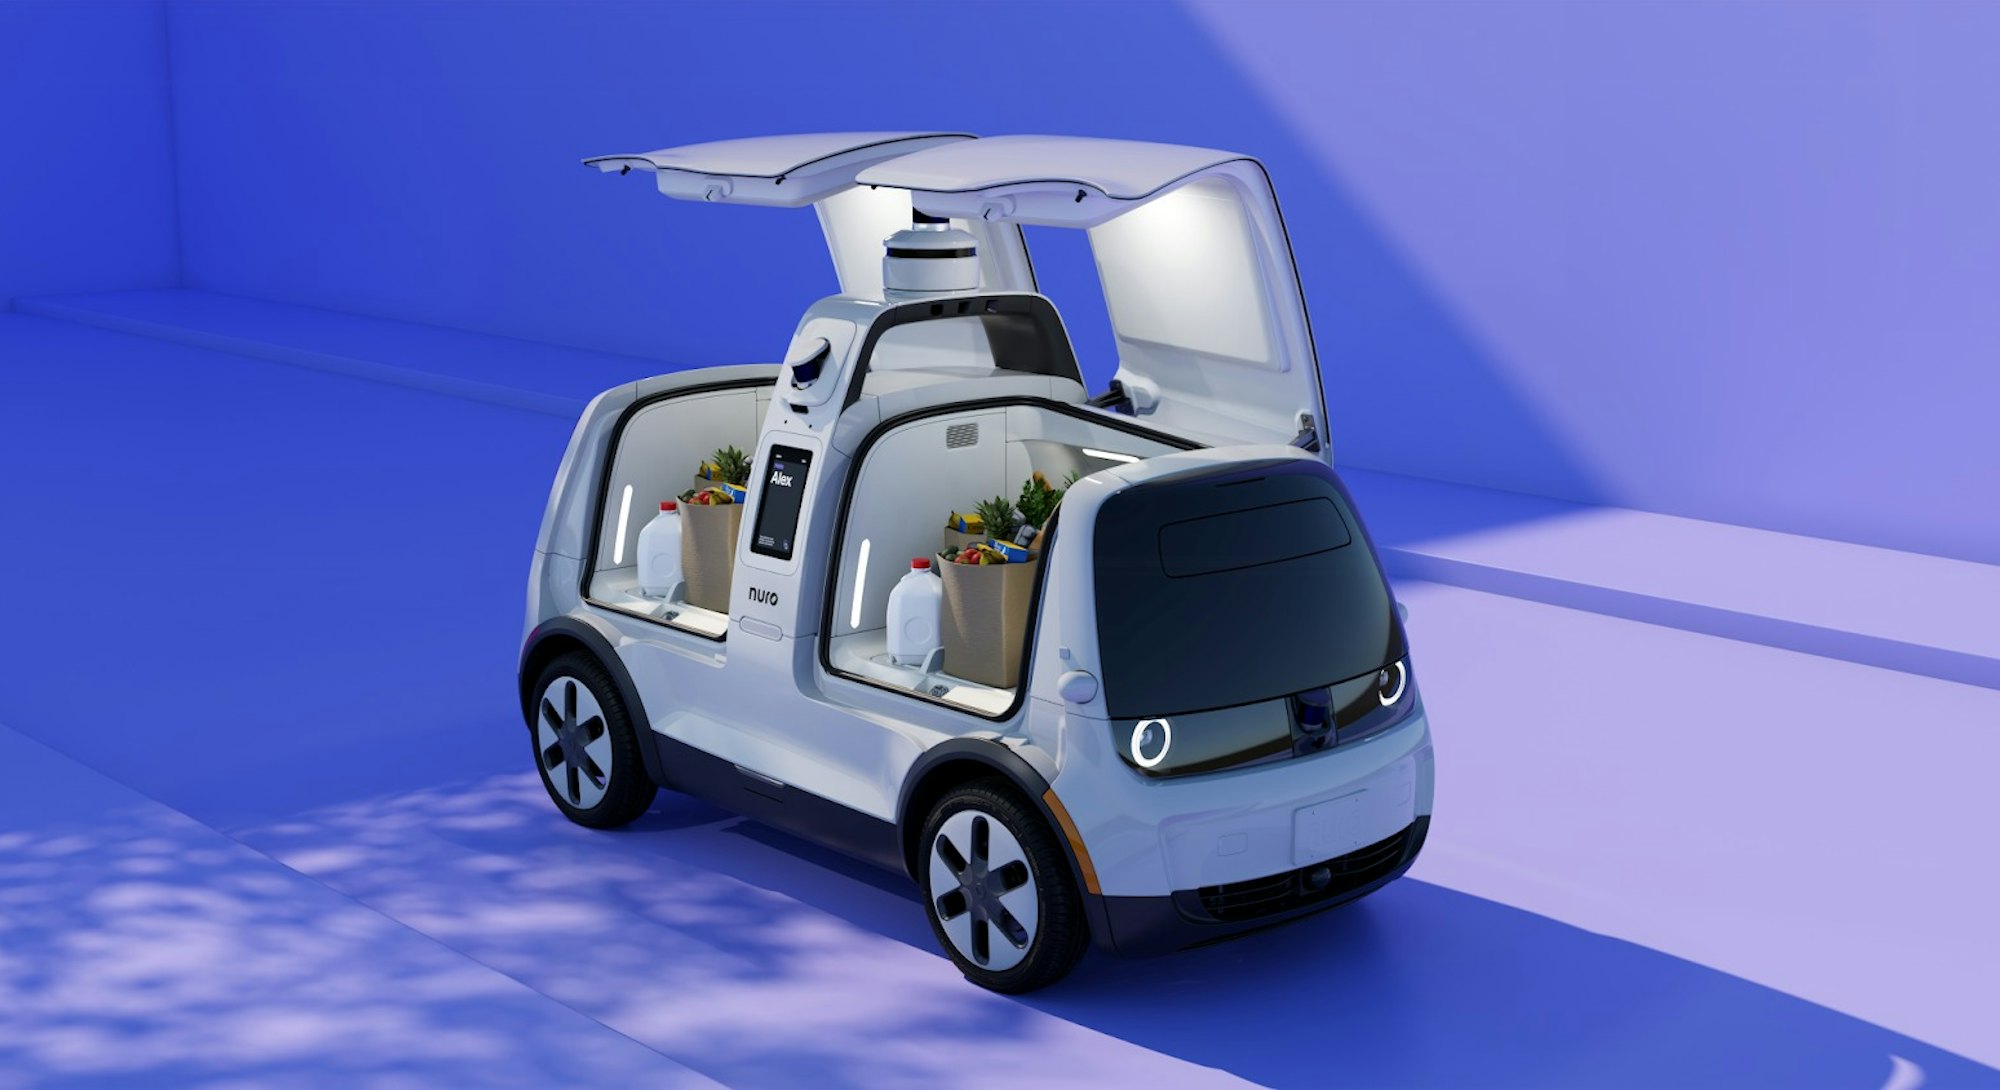 Nuro's electric self-driving delivery robot with airbags on the outside.